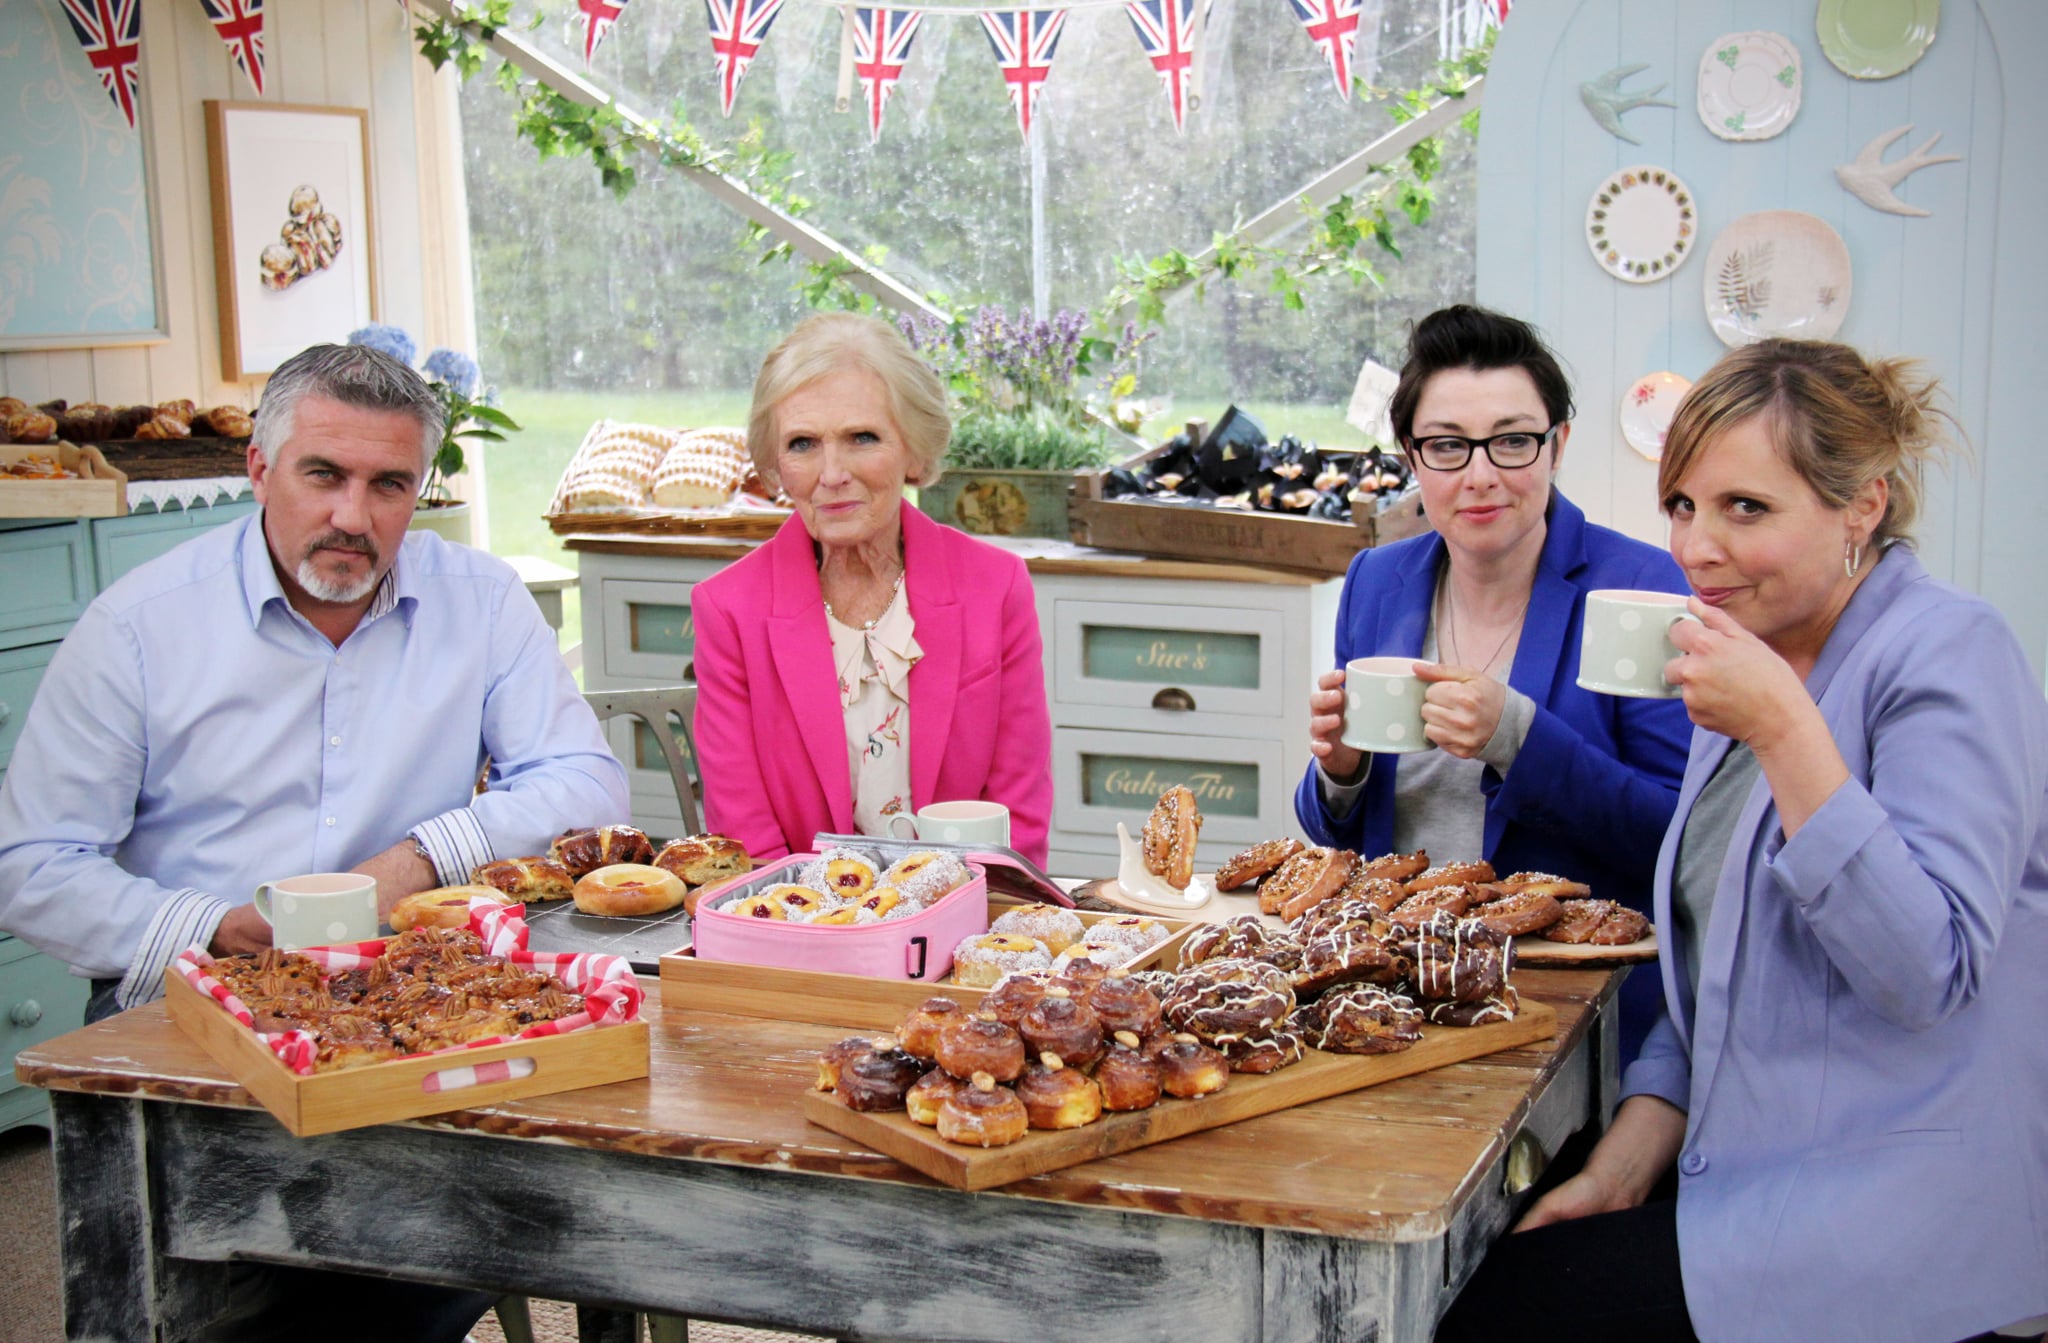 THE GREAT BRITISH BAKE OFF (aka THE GREAT BRITISH BAKING SHOW), from left: judge Paul Hollywood, judge Mary Berry, co-host/presenter Sue Perkins, co-host/presenter Mel Giedroyc, 'Sweet Dough', (Series 4, originally aired in U.K. on Sept. 24, 2013 / Season 2, aired in U.S. on Oct. 11, 2015). photo:  Love Productions/PBS / Courtesy: Everett Collection